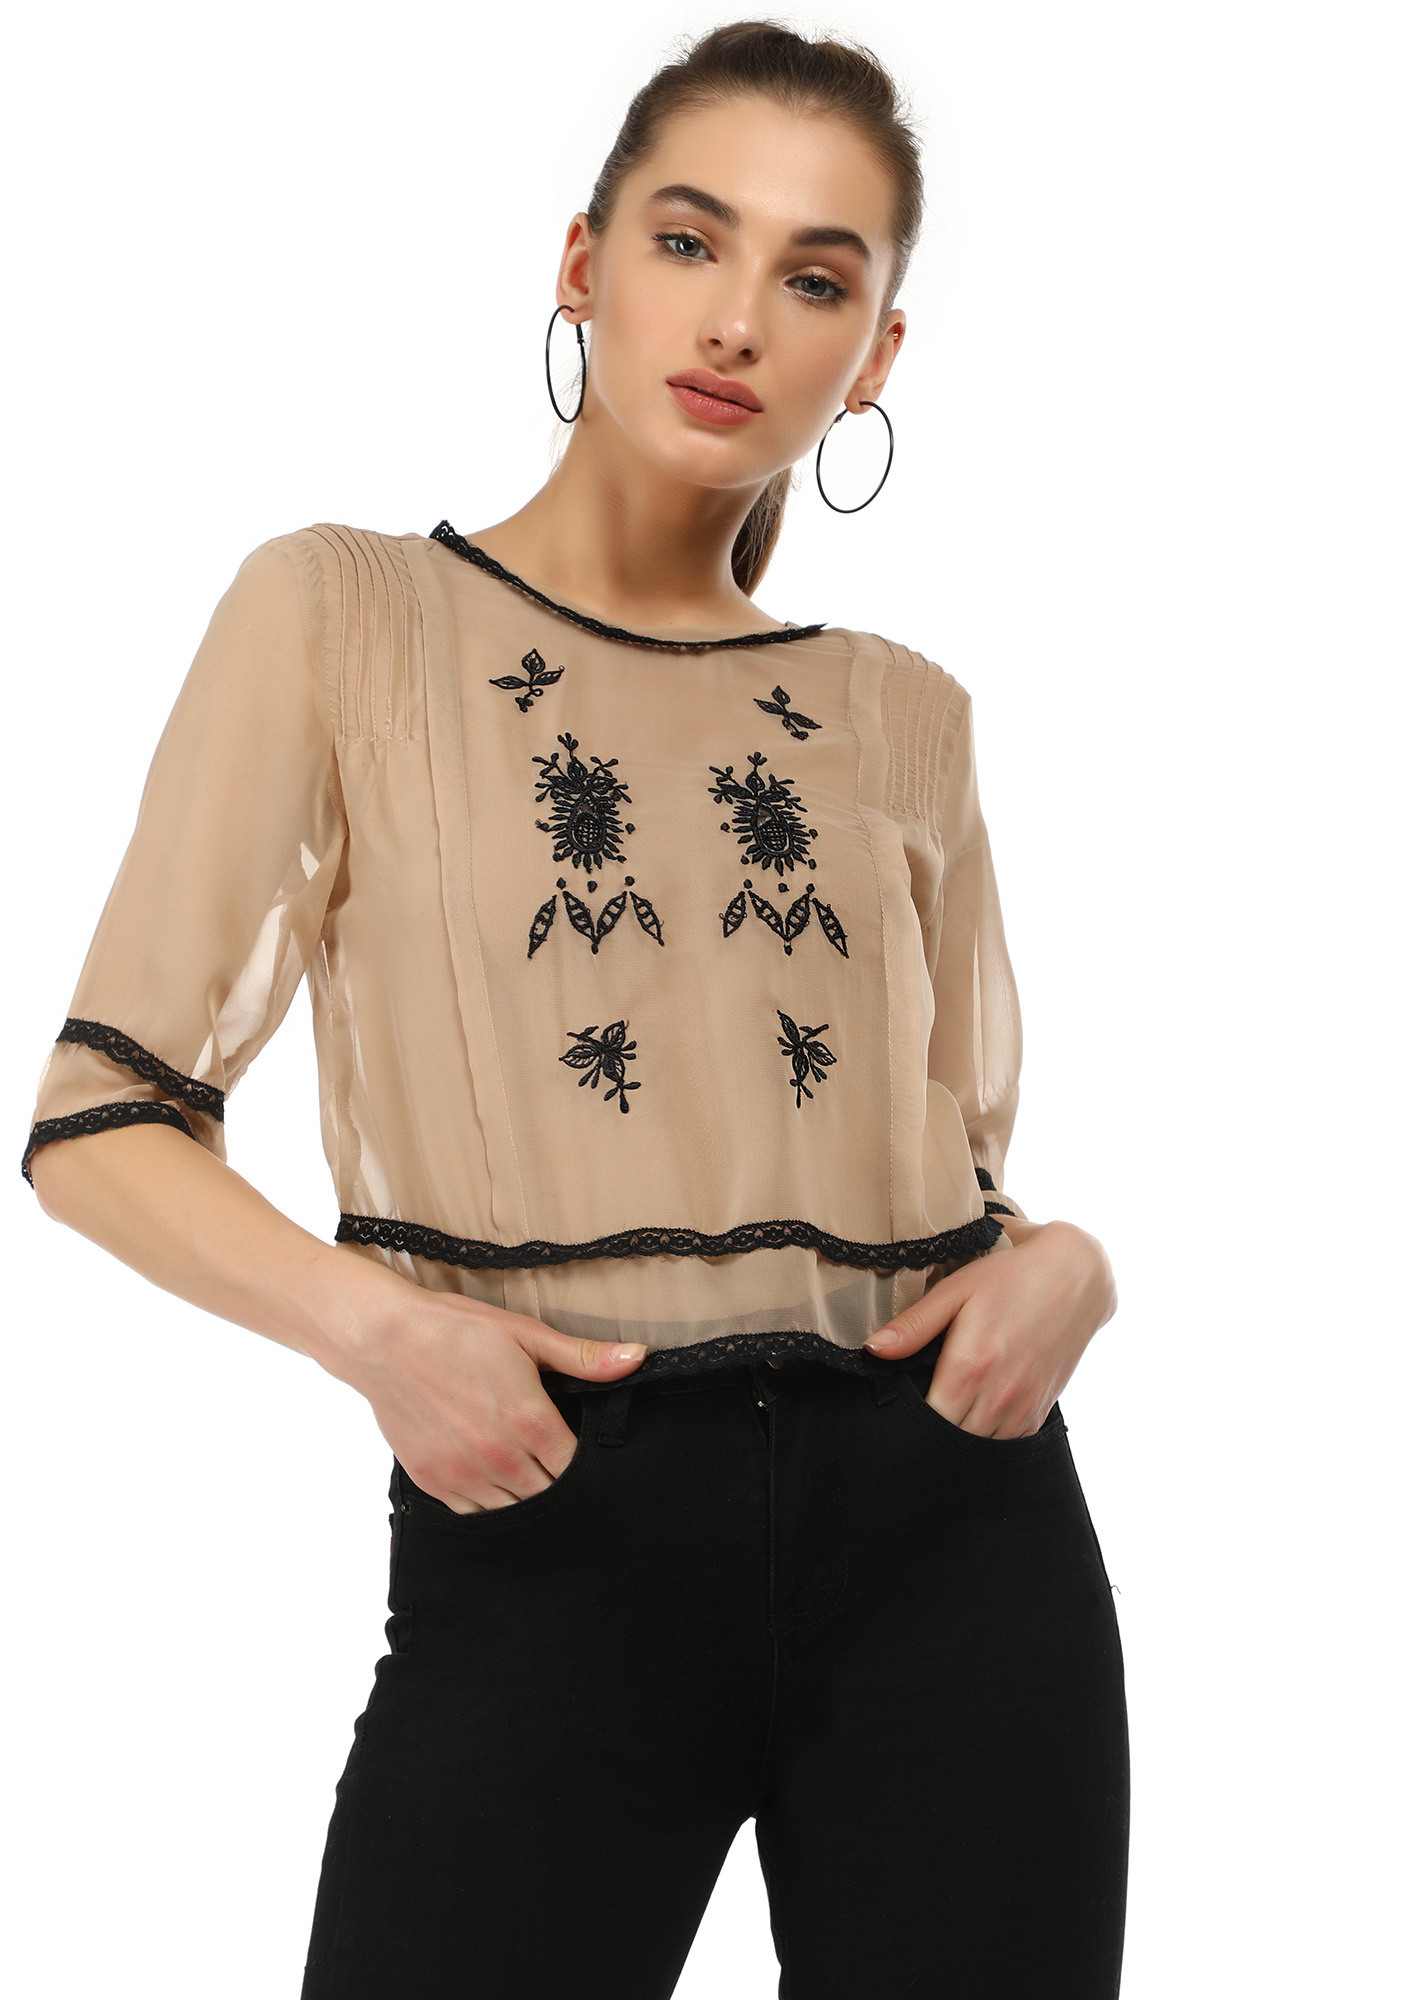 NOT SO SHEER EMBROIDERED IVORY BLOUSE